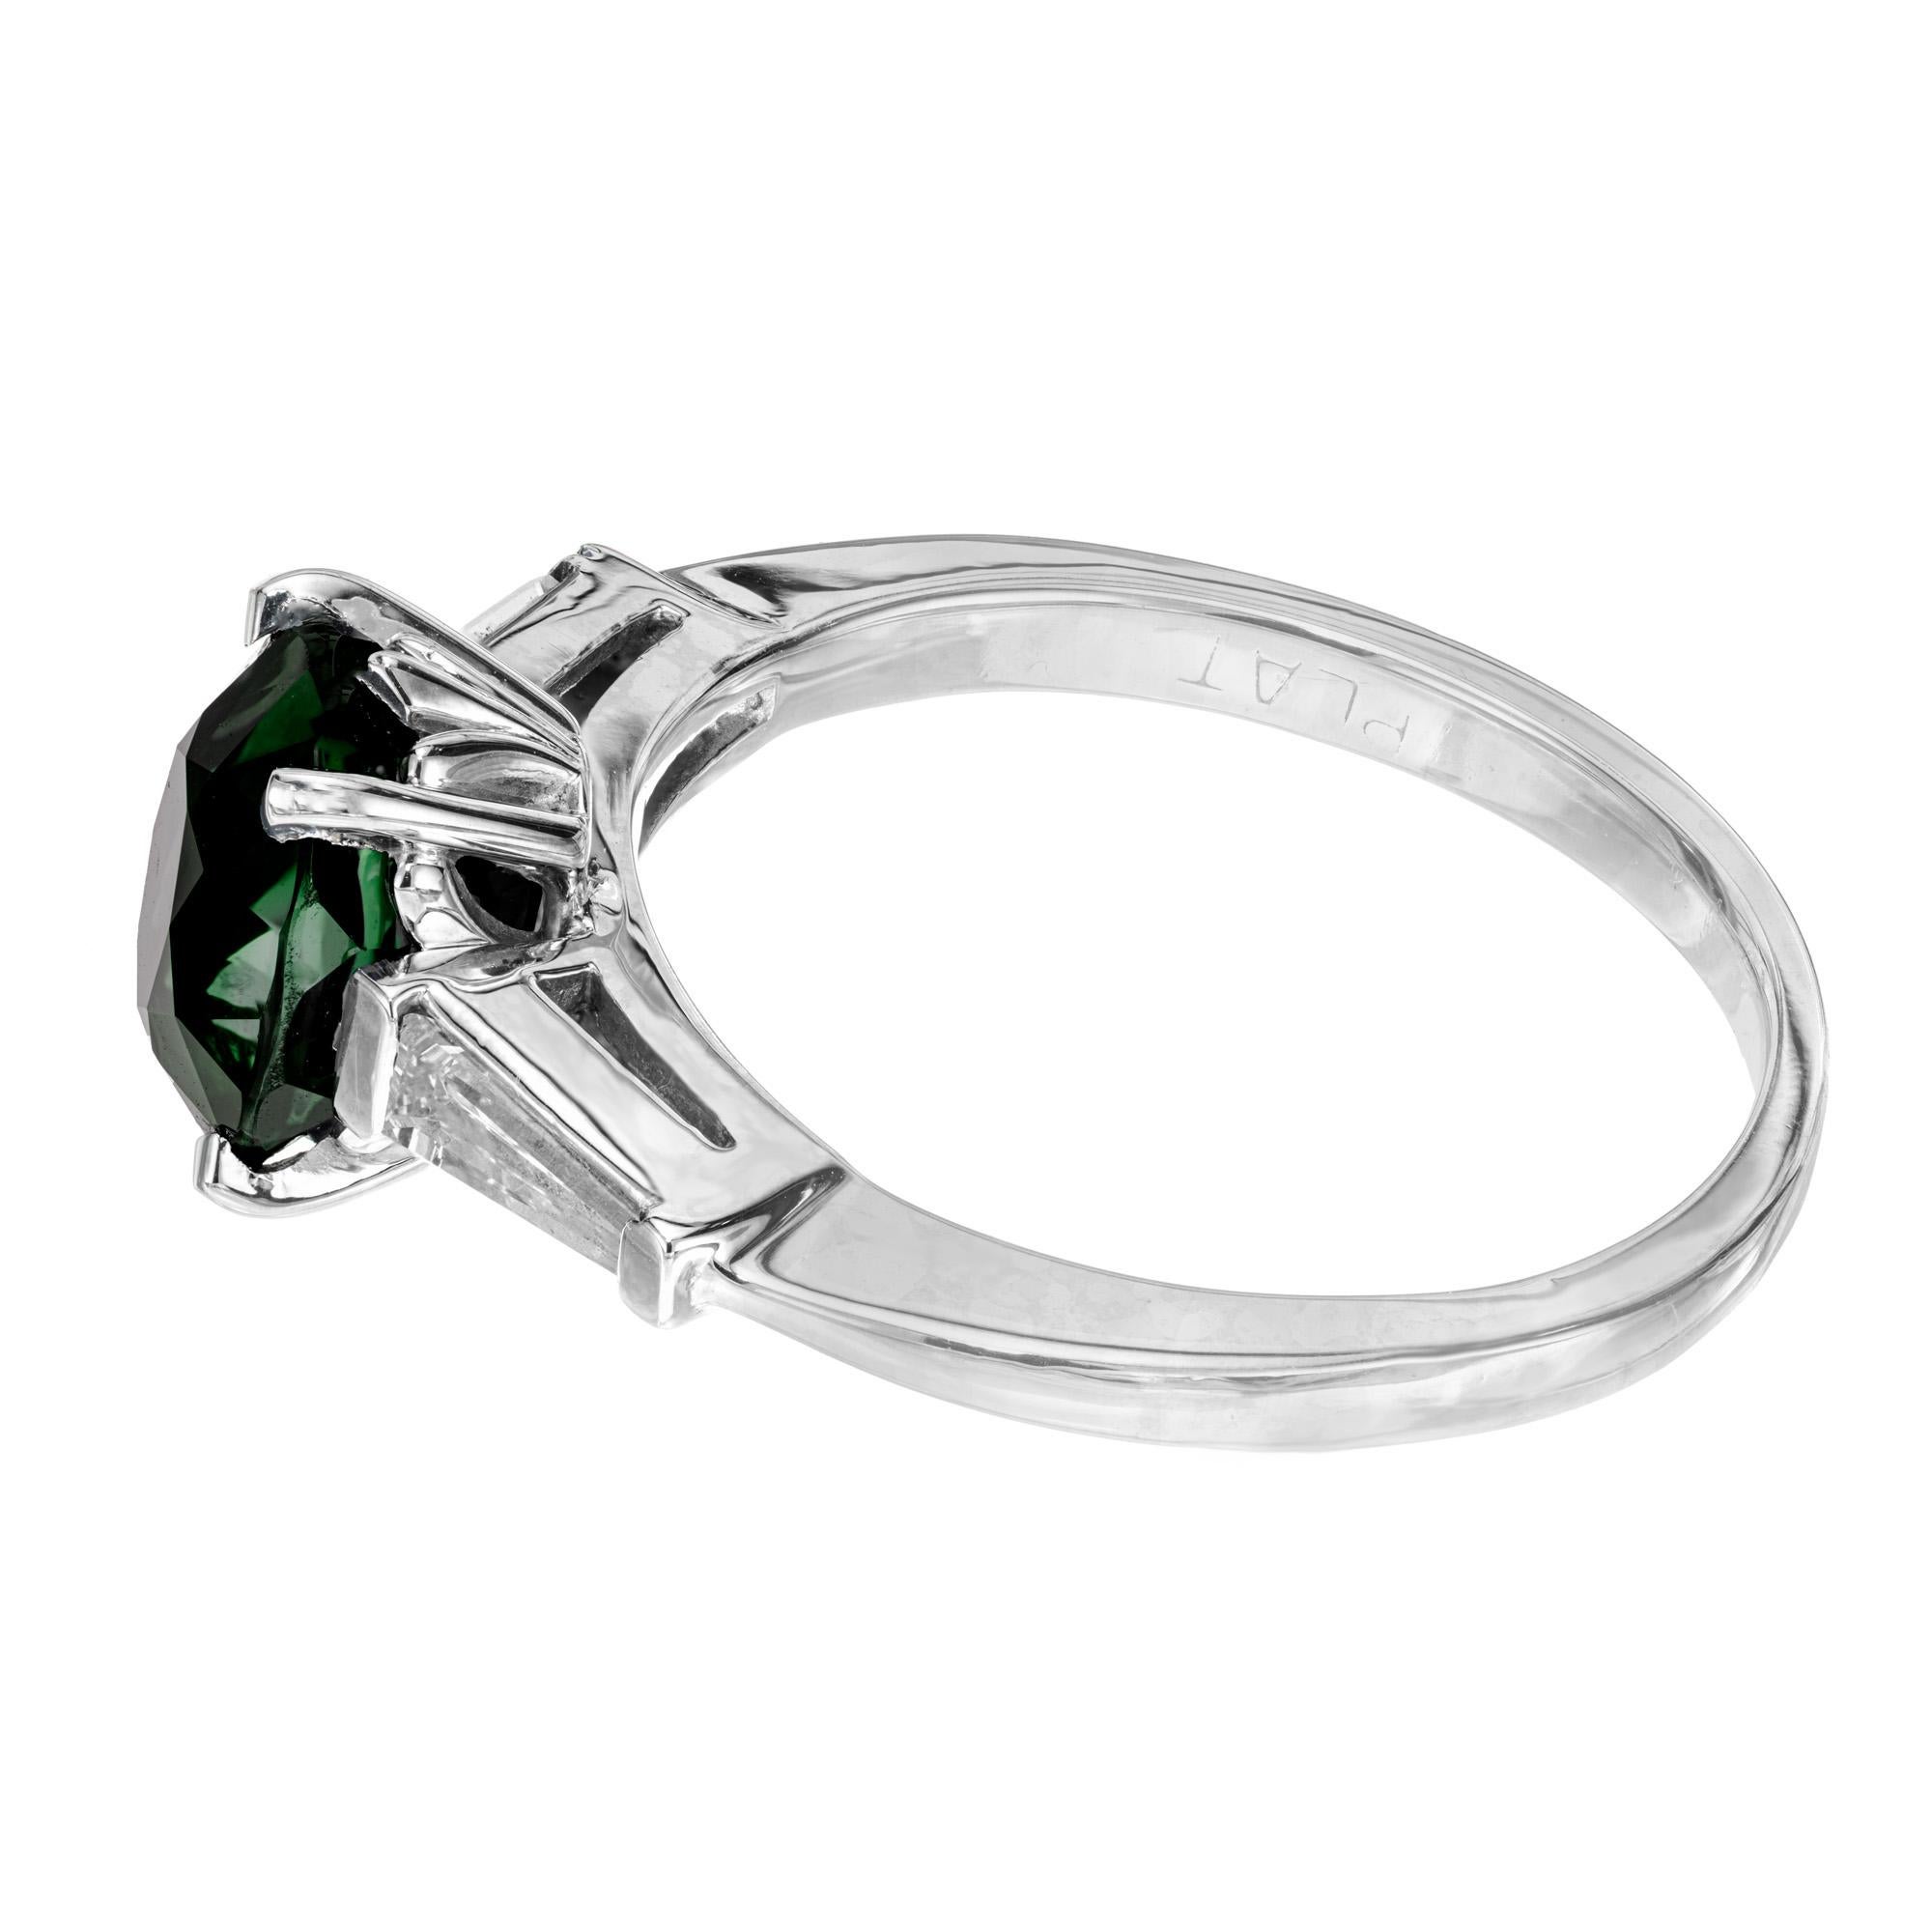 Women's Peter Suchy GIA Certified 2.59 Carat Green Sapphire Diamond Platinum Ring For Sale